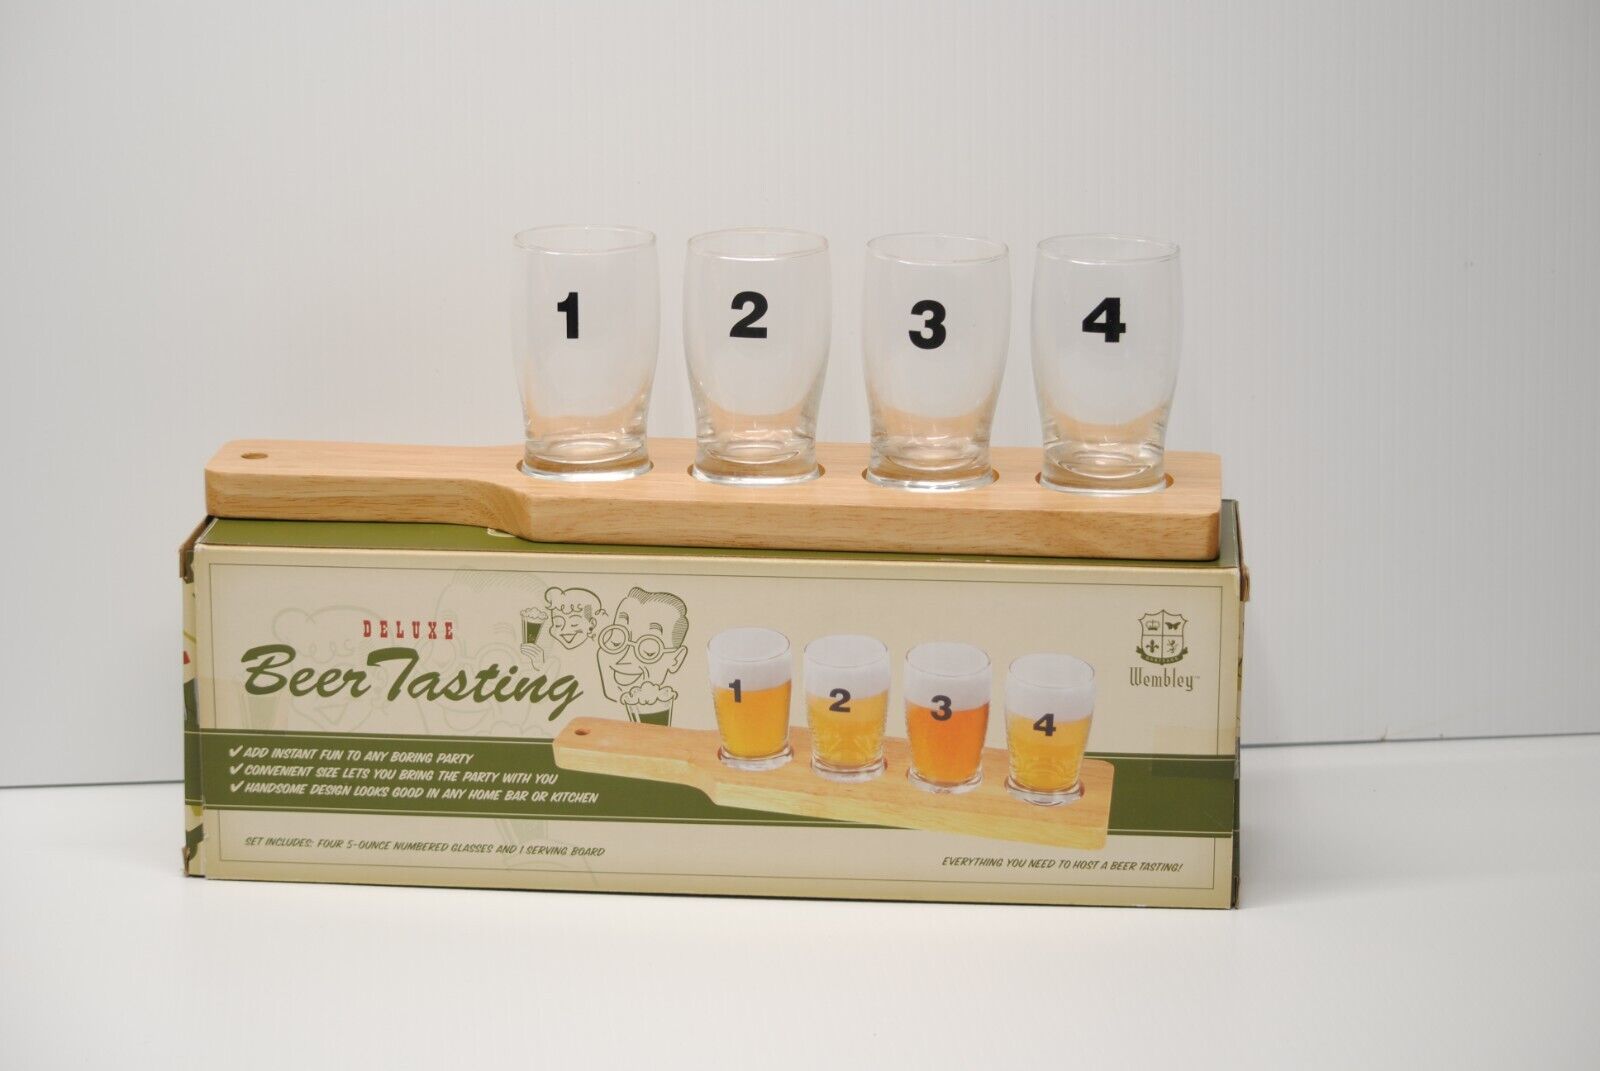 Wembley Beer Tasting Set with 4 Glasses and Wooden Serving Board